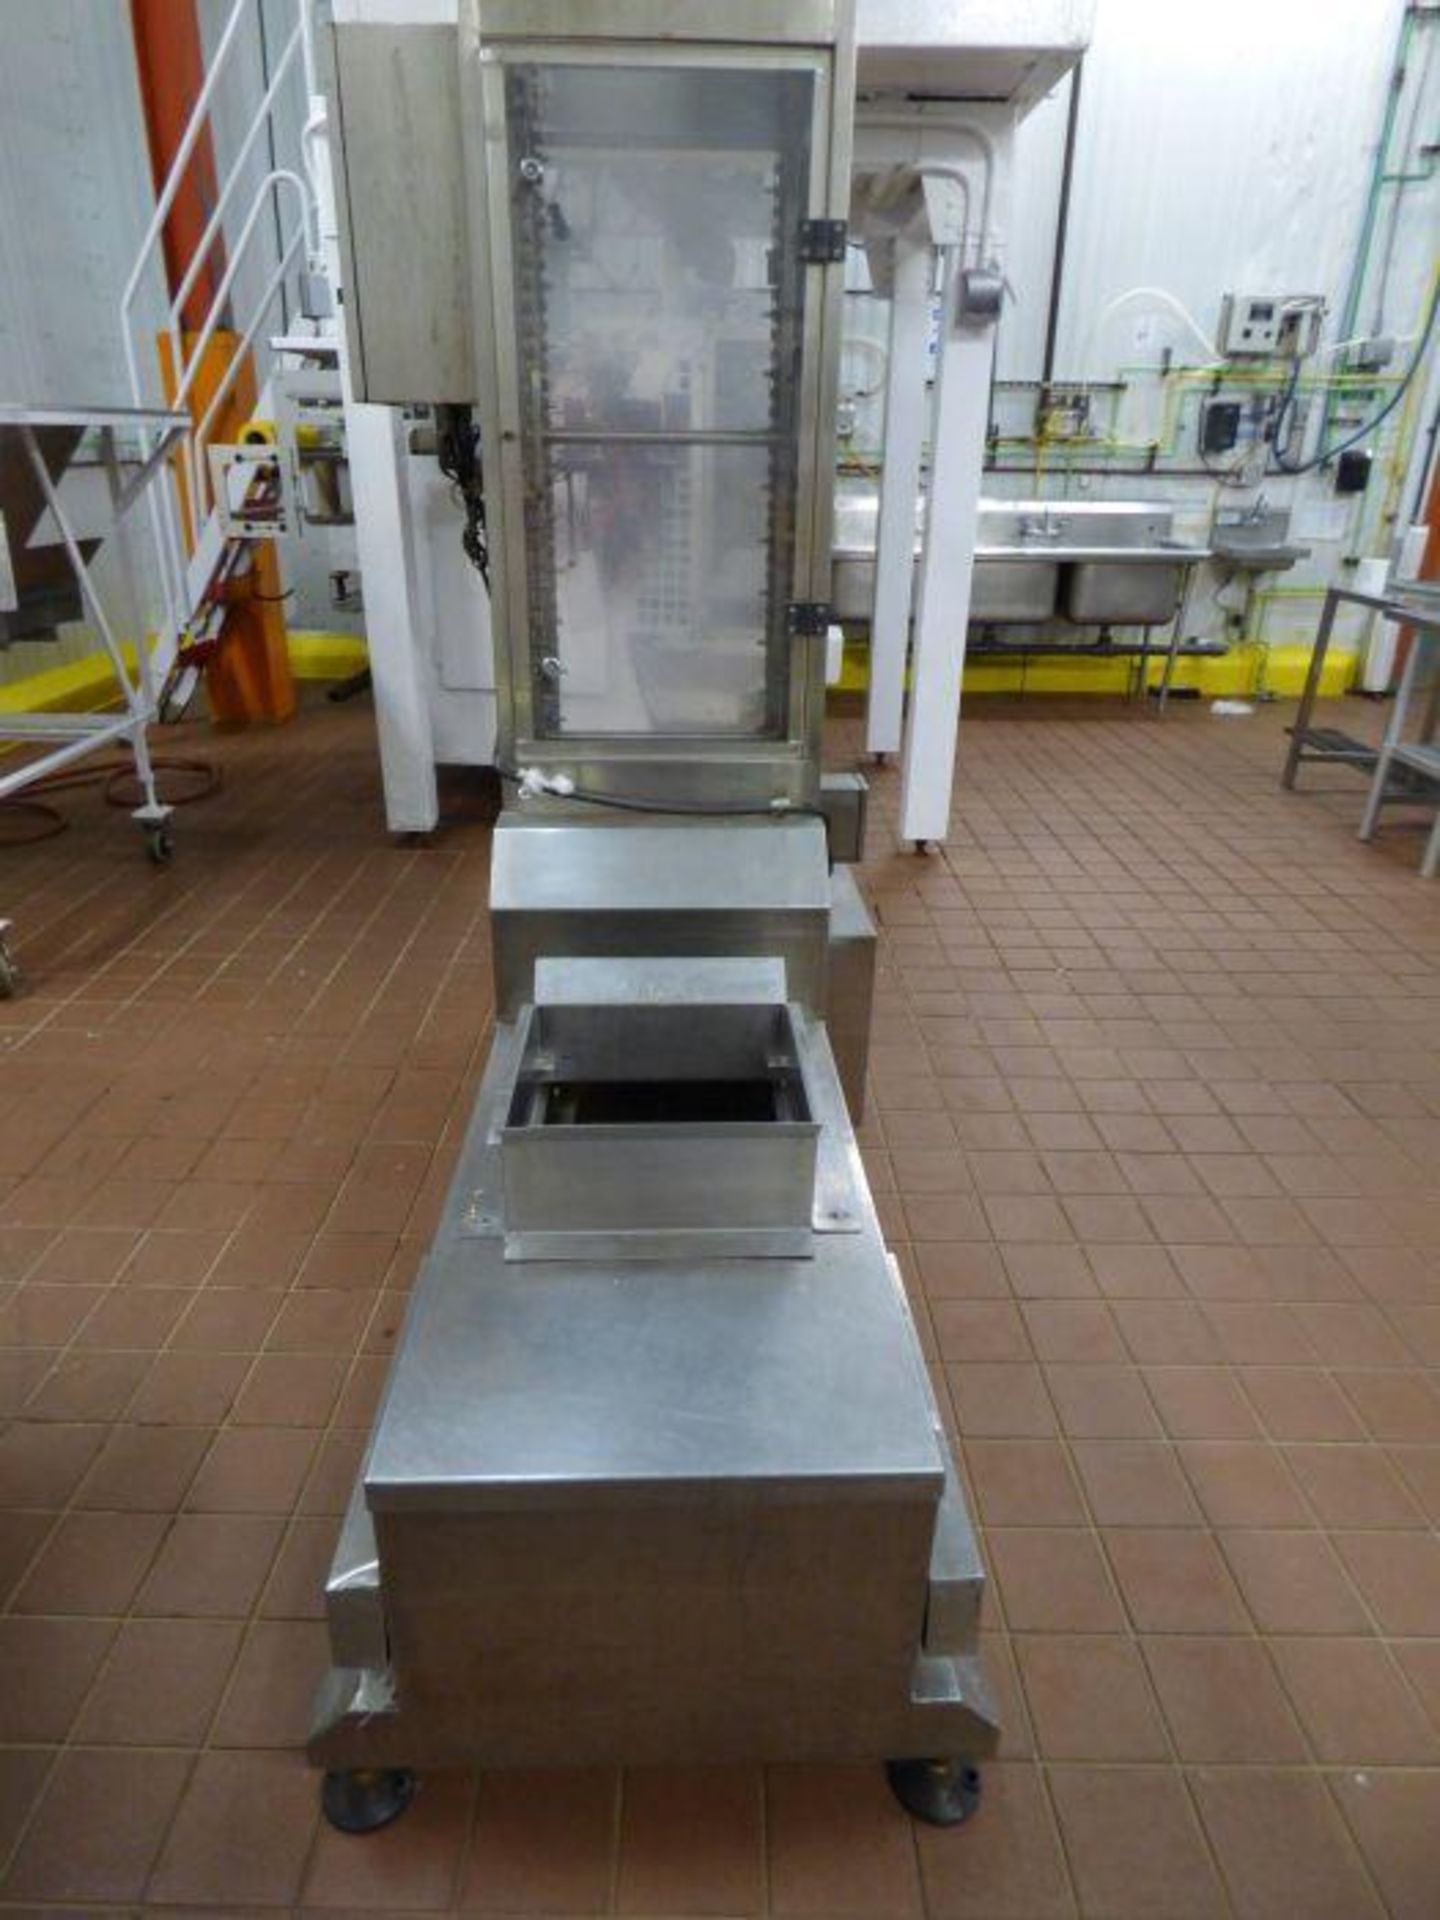 2012 Ohlson Stainless Steel Infeed Bucket Elevator with Eriez Inline Metal Detector - Image 9 of 13